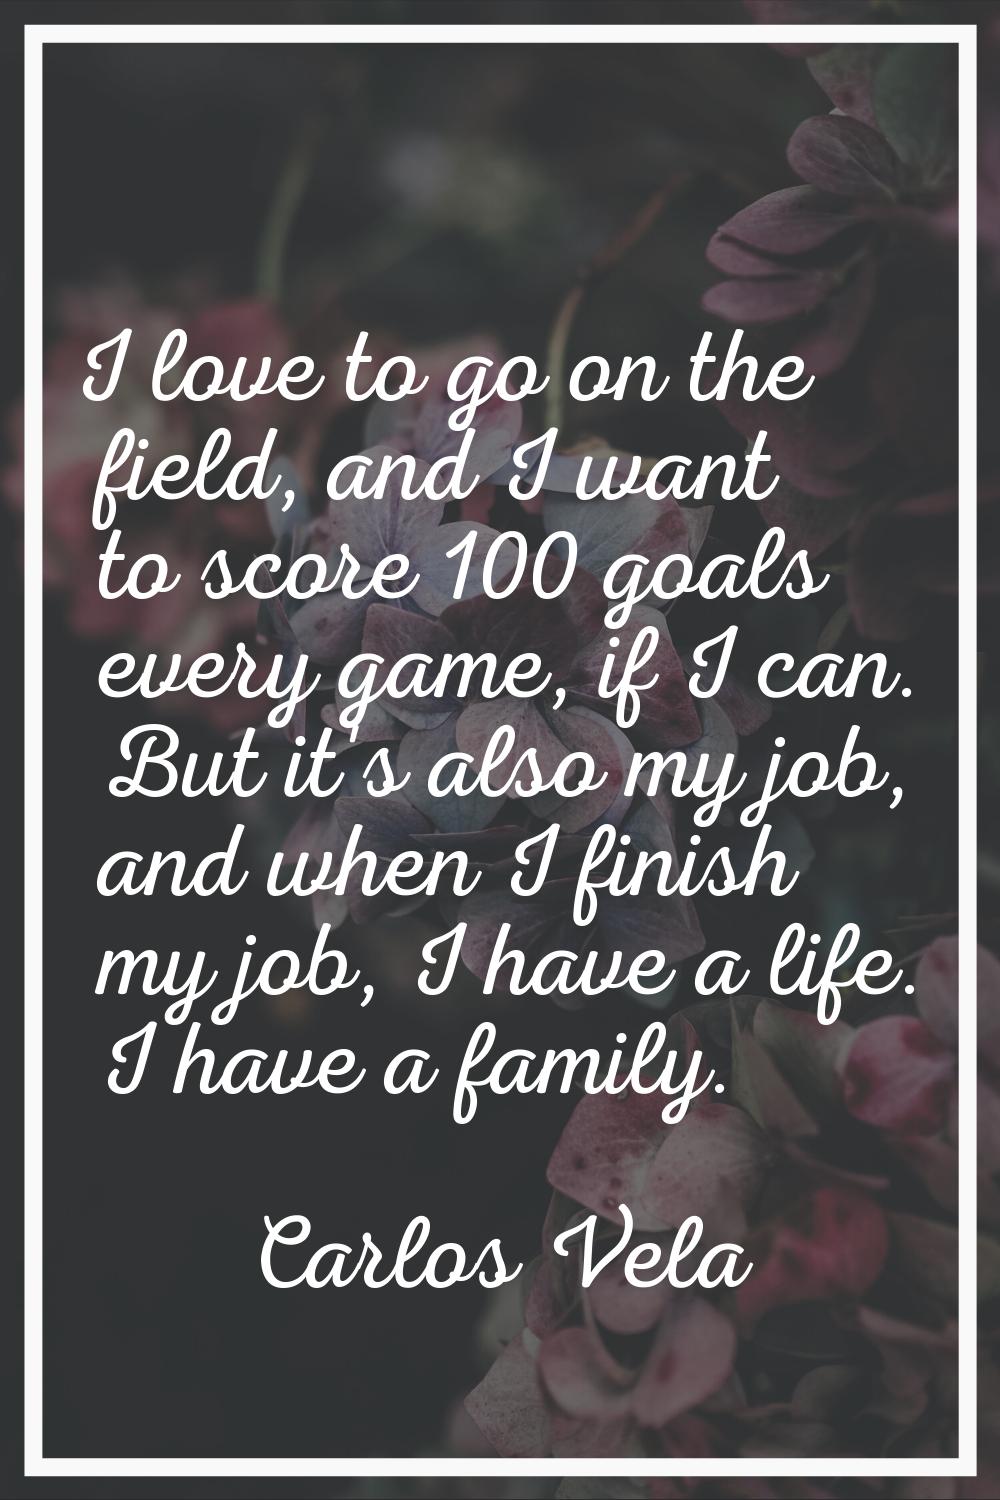 I love to go on the field, and I want to score 100 goals every game, if I can. But it's also my job